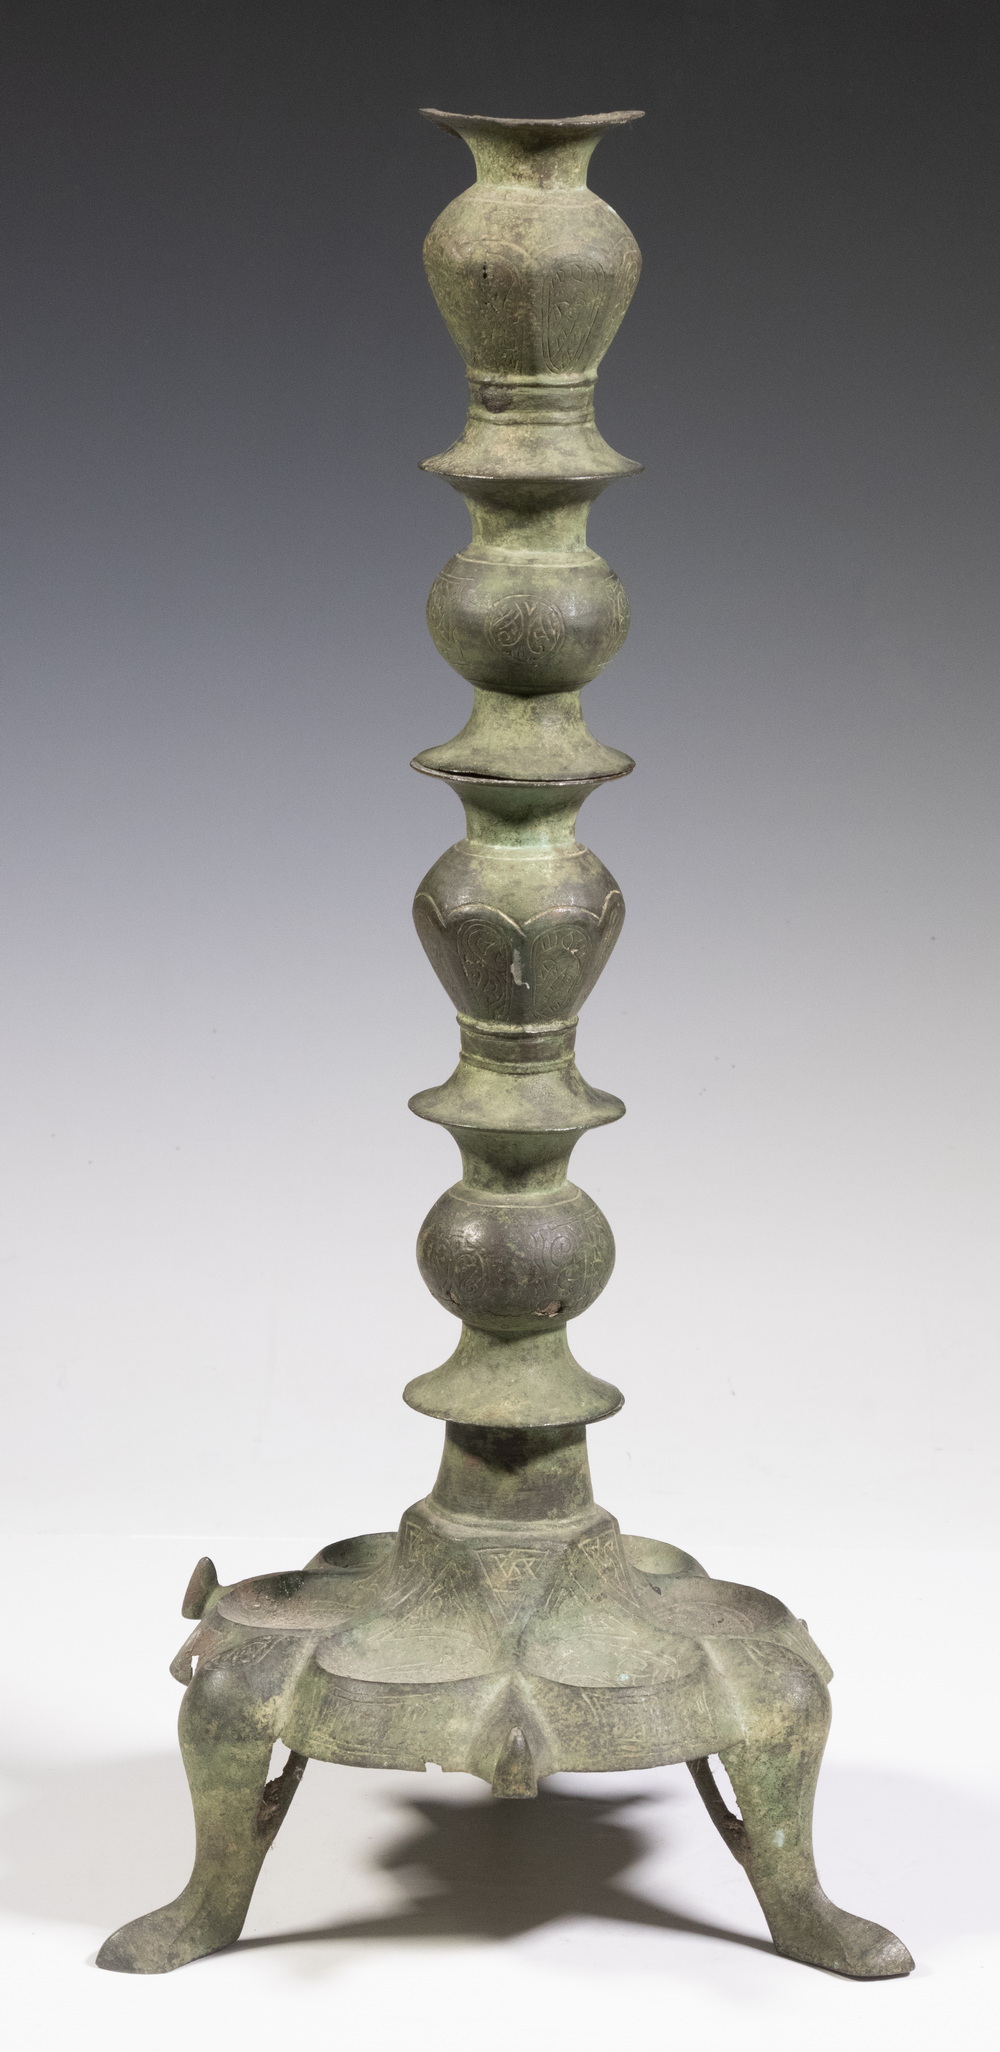 ANCIENT PERSIAN BRONZE CANDLESTICK 3rd-6th